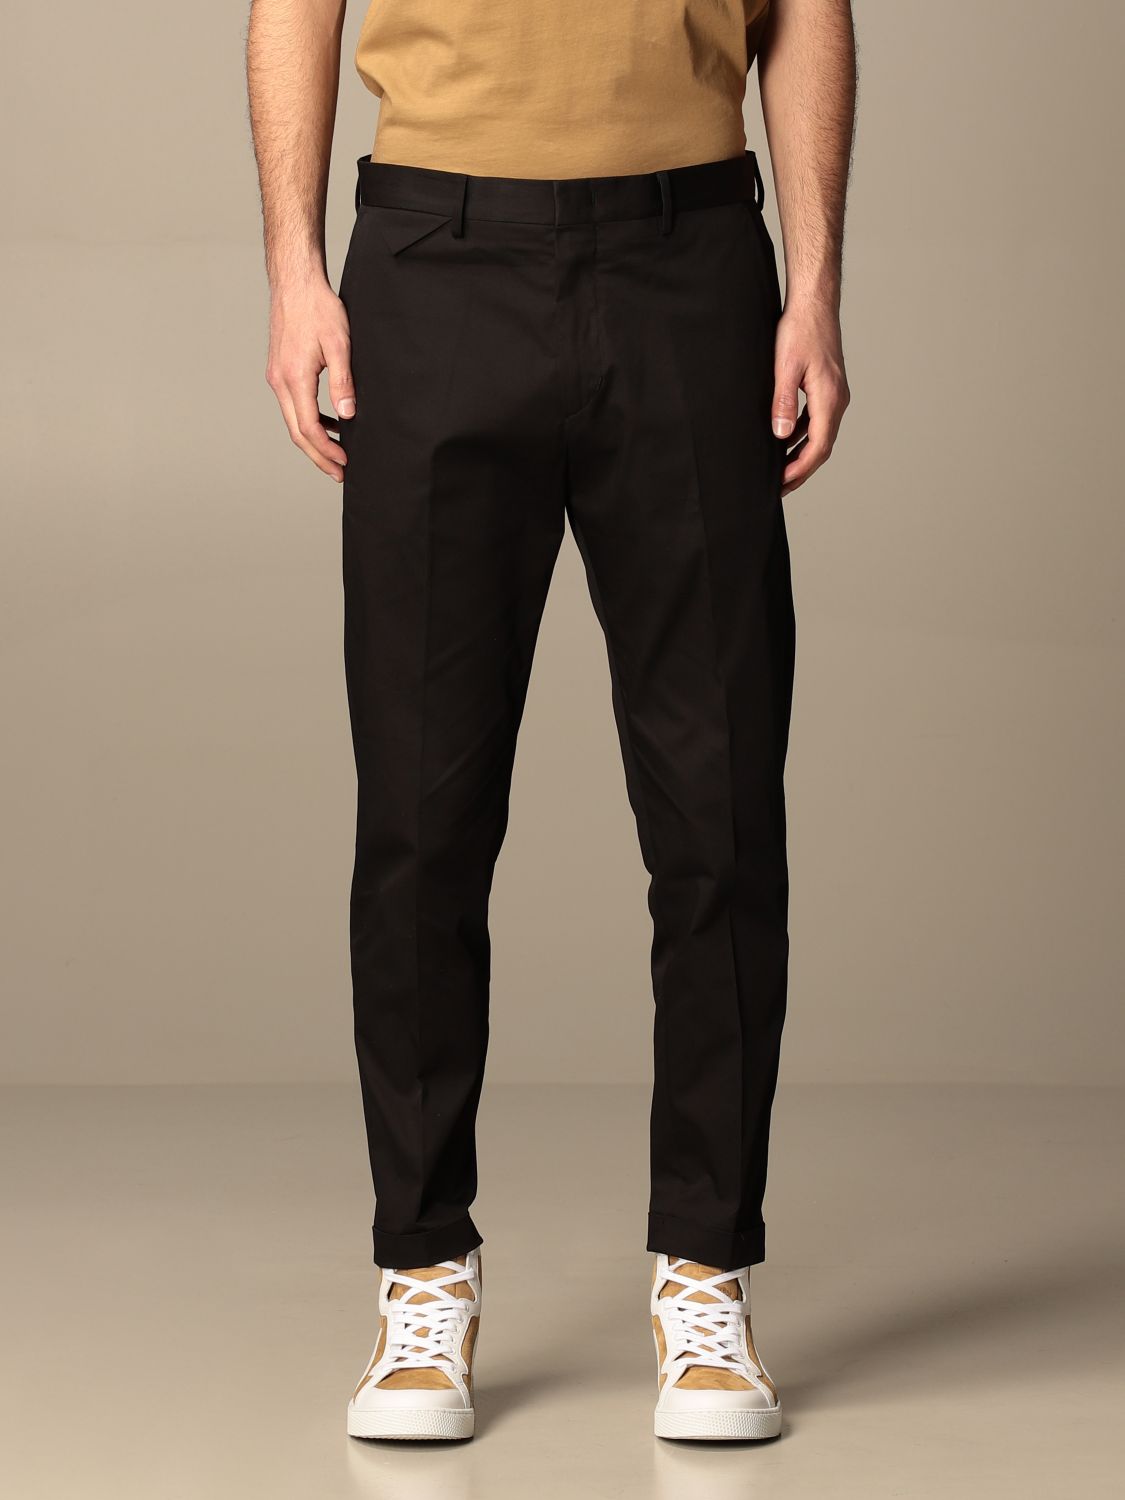 LOW BRAND: Classic pants with america pockets - Black | Pants Low Brand ...